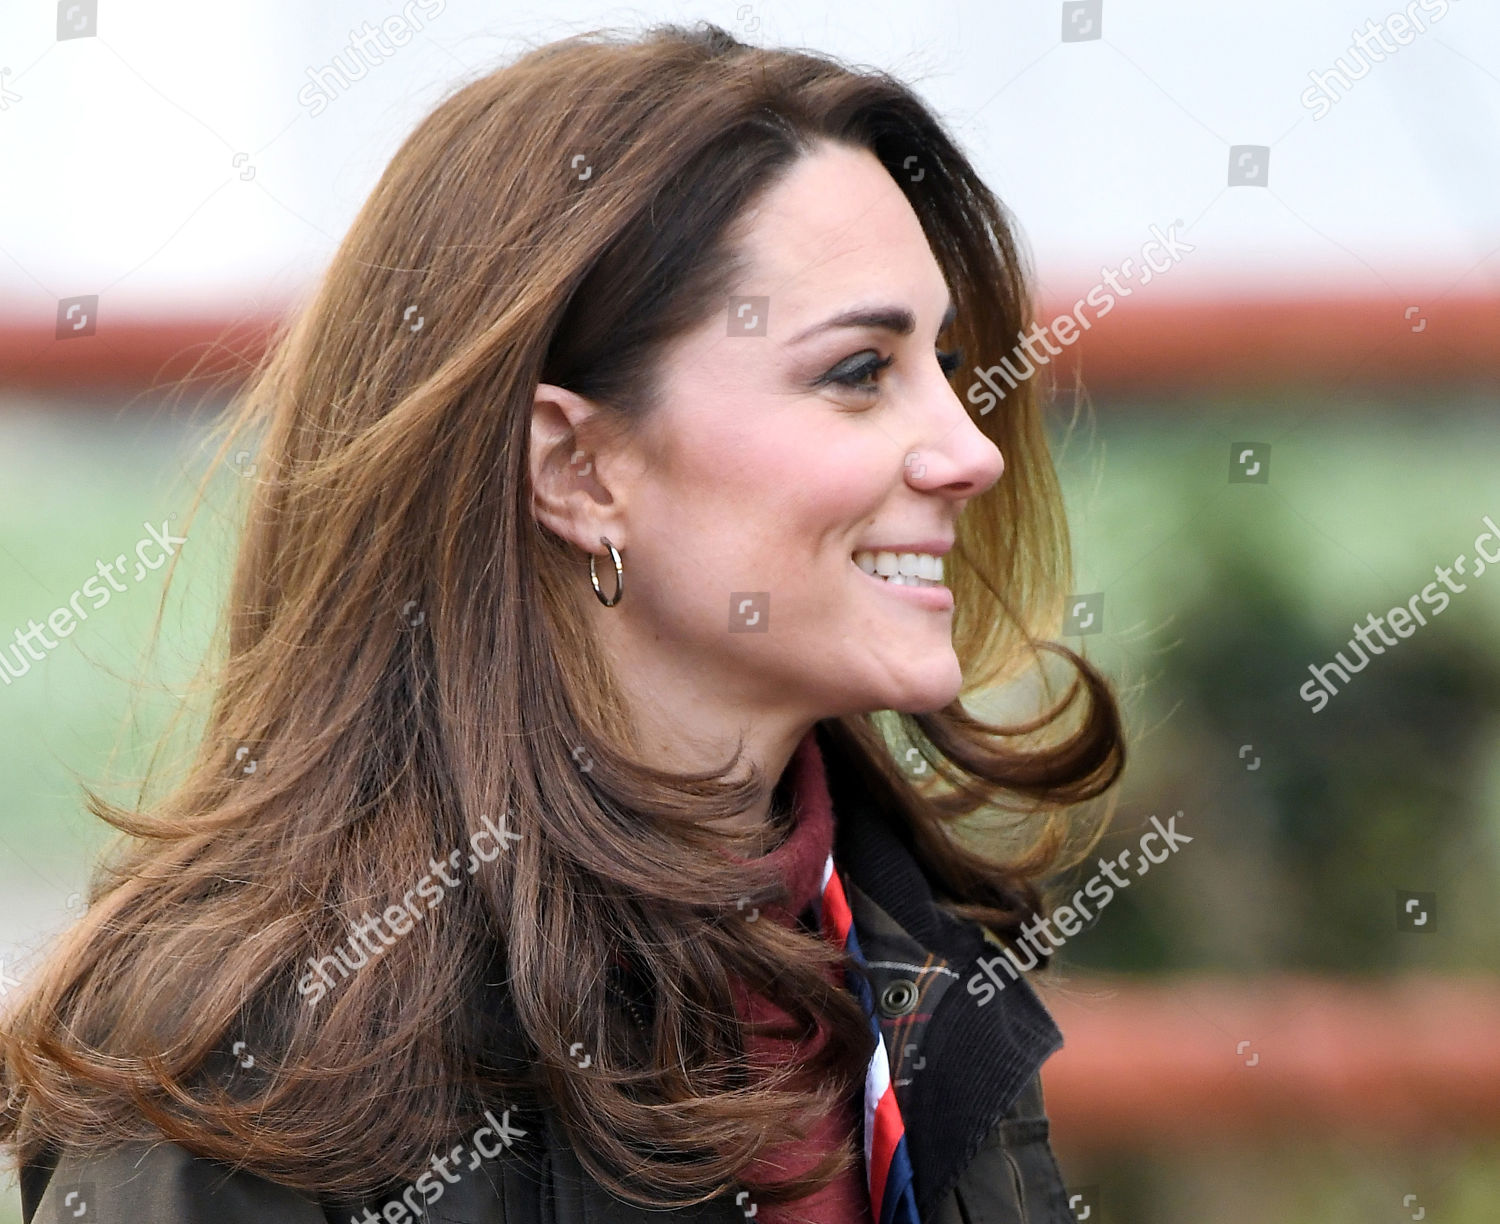 catherine-duchess-of-cambridge-visit-to-the-scouts-gilwell-park-essex-uk-shutterstock-editorial-10179979ad.jpg